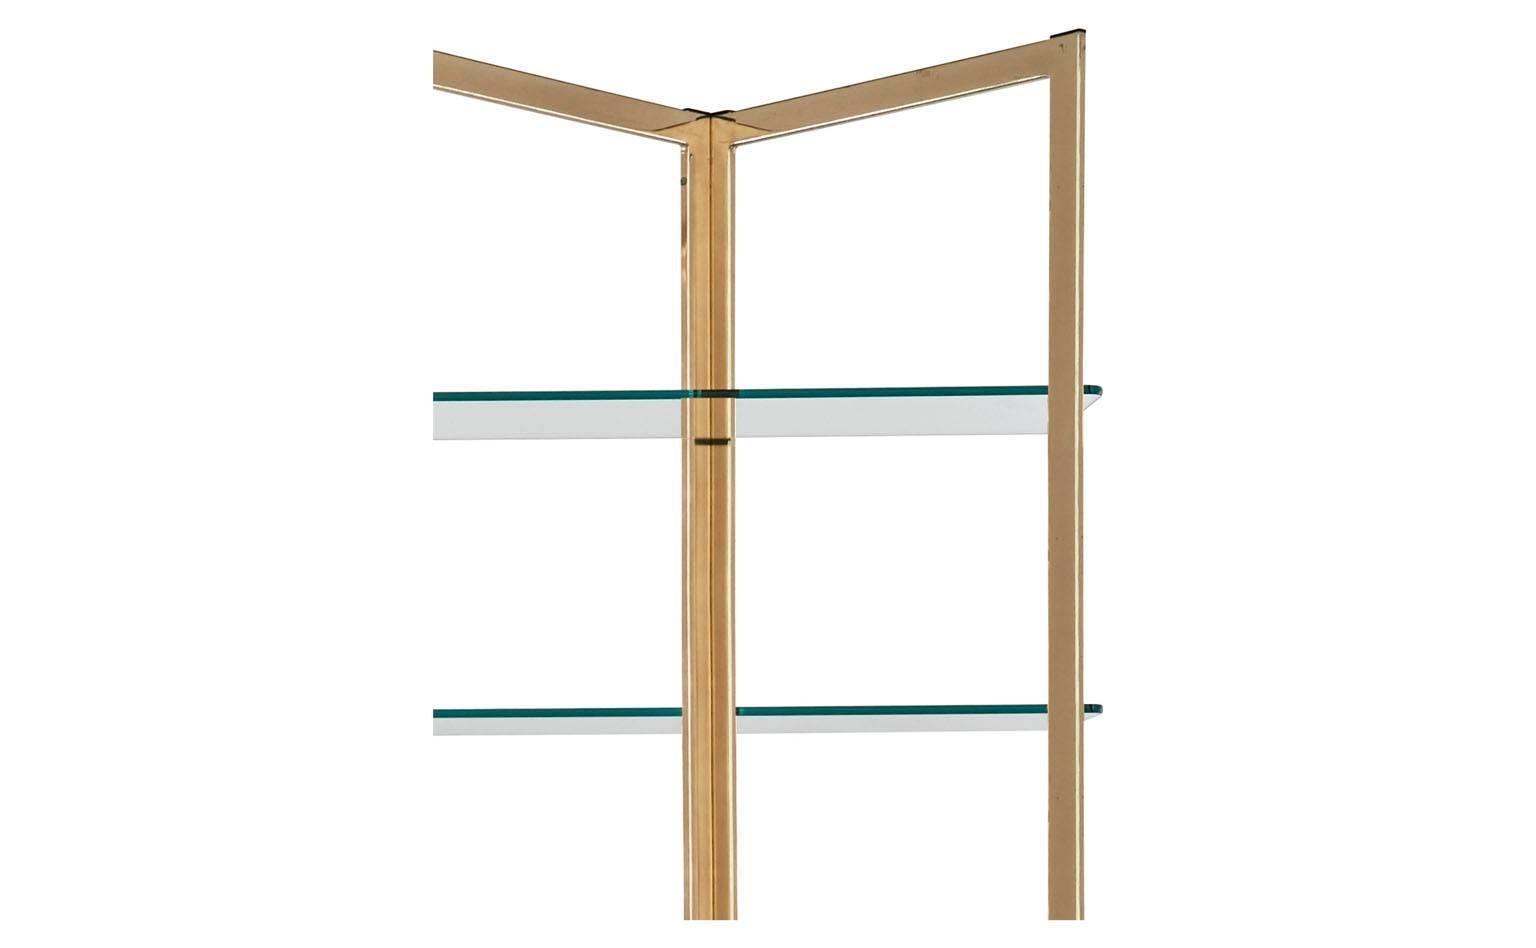 Brass accordion frame
Glass shelves
20th century
American
Measures:  14.5'D x 57'W x 80.25'H